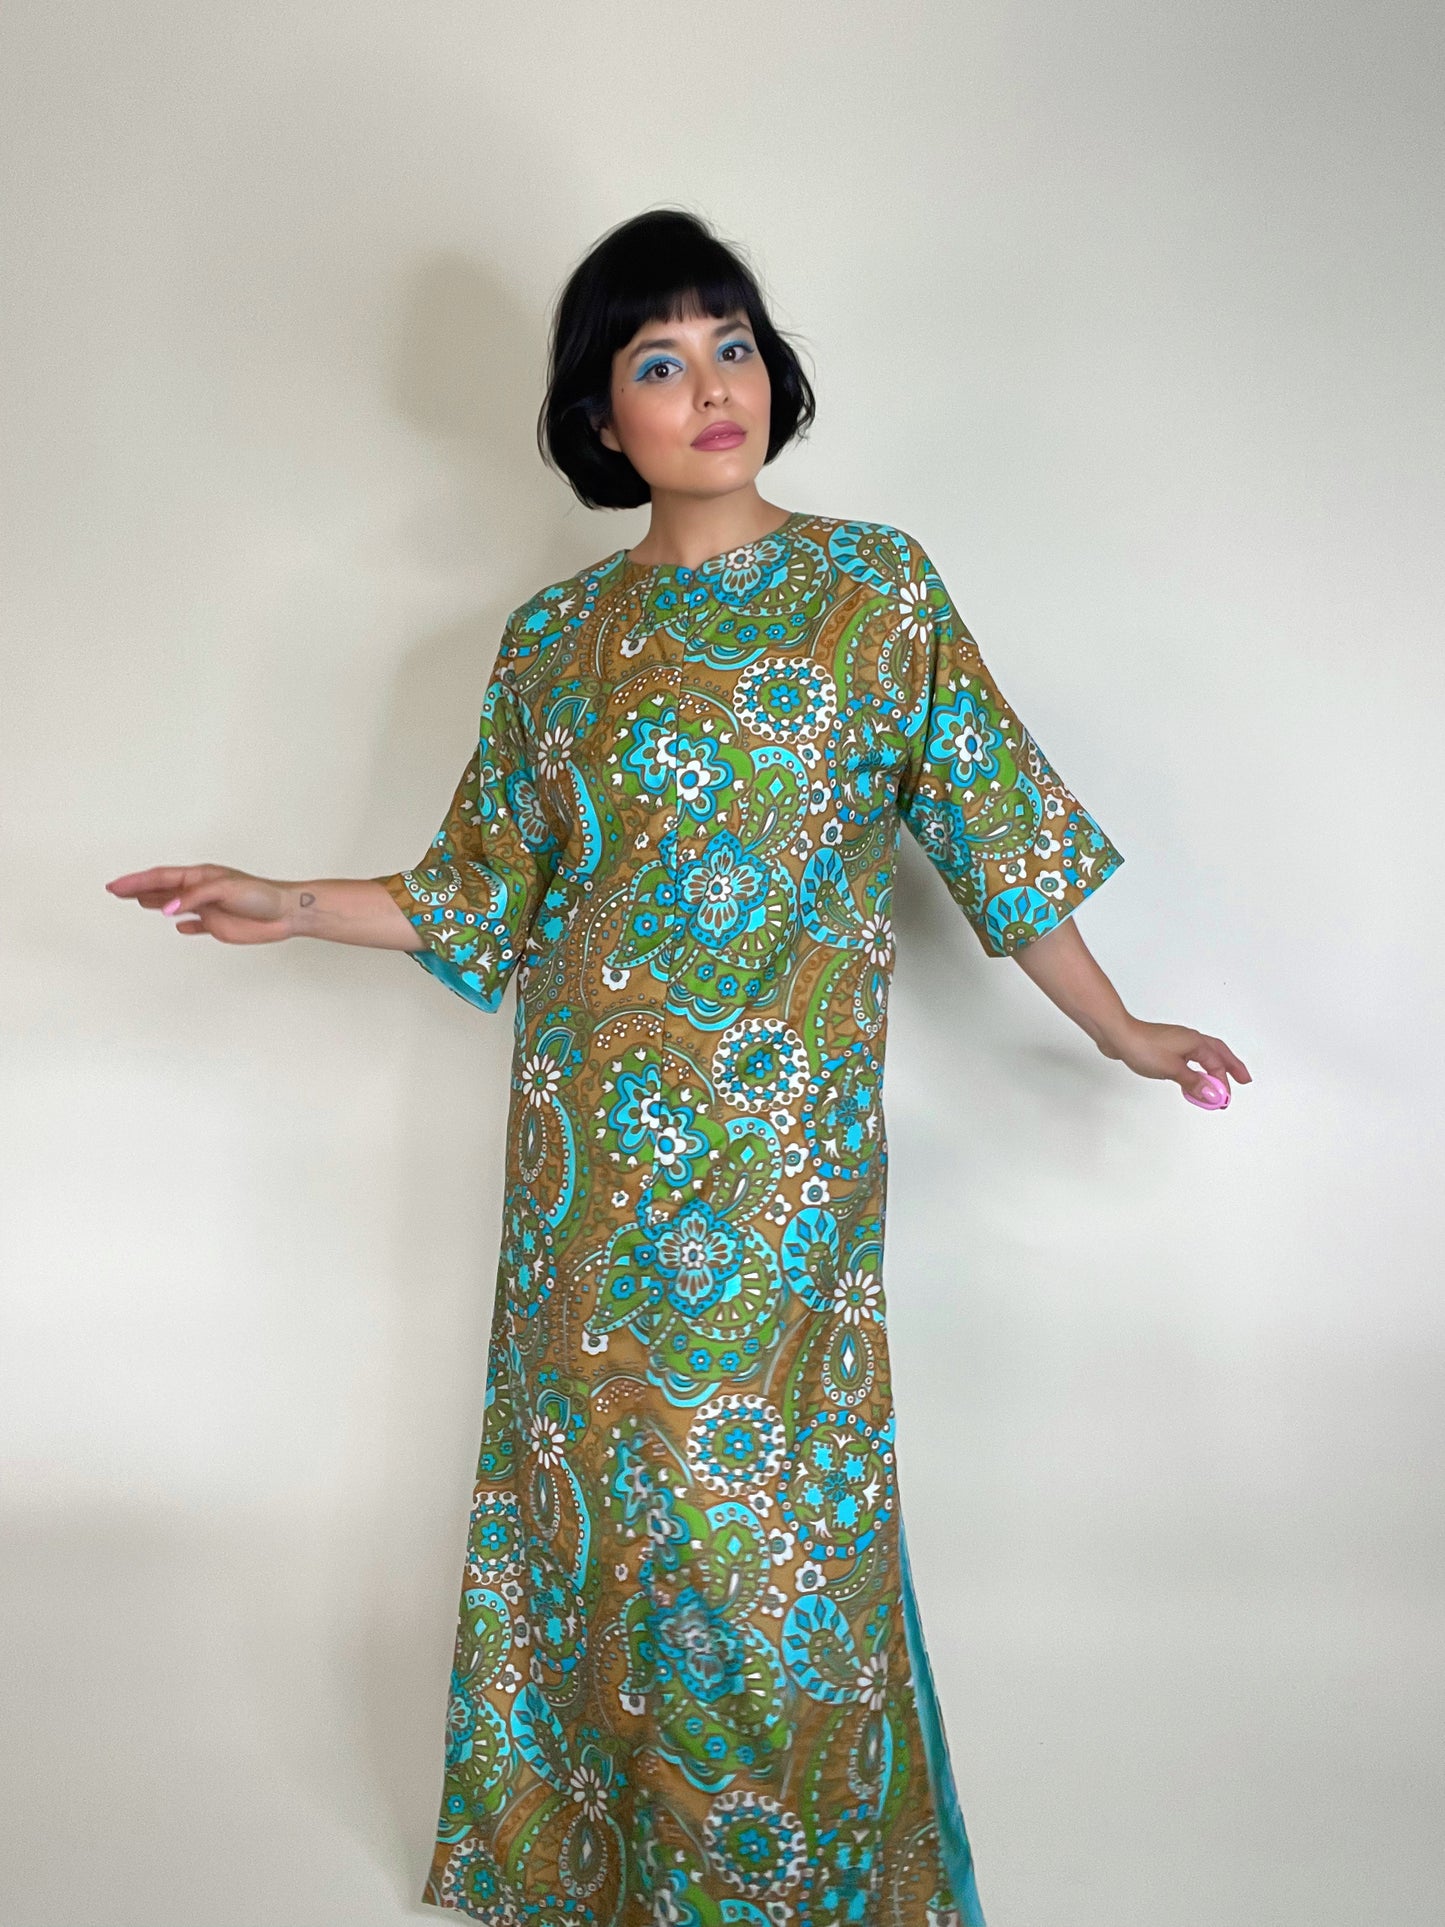 Vintage 60s Brown and Turquoise Floral Paisley Print Zip Up Dress with Side Slit Fits Sizes XS-M